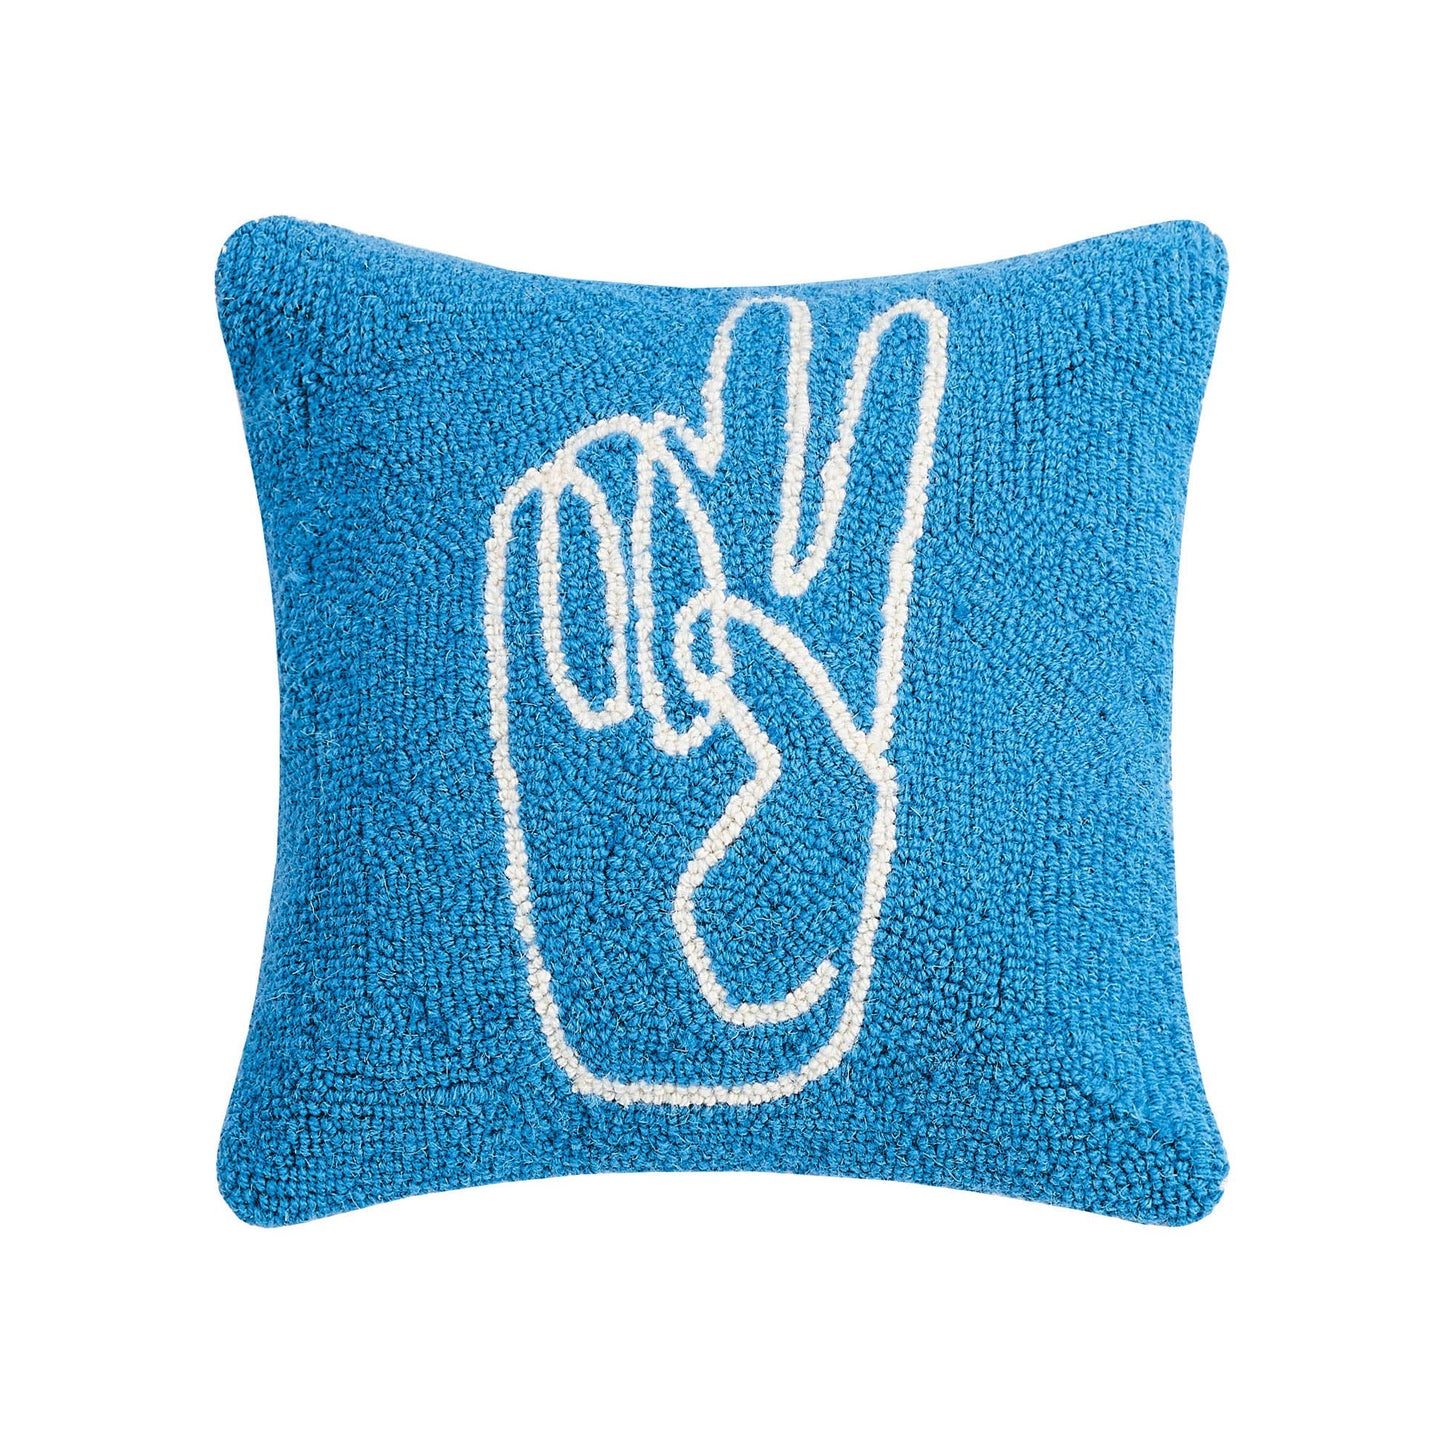 Peace Hand Hook Pillow by Ampersand